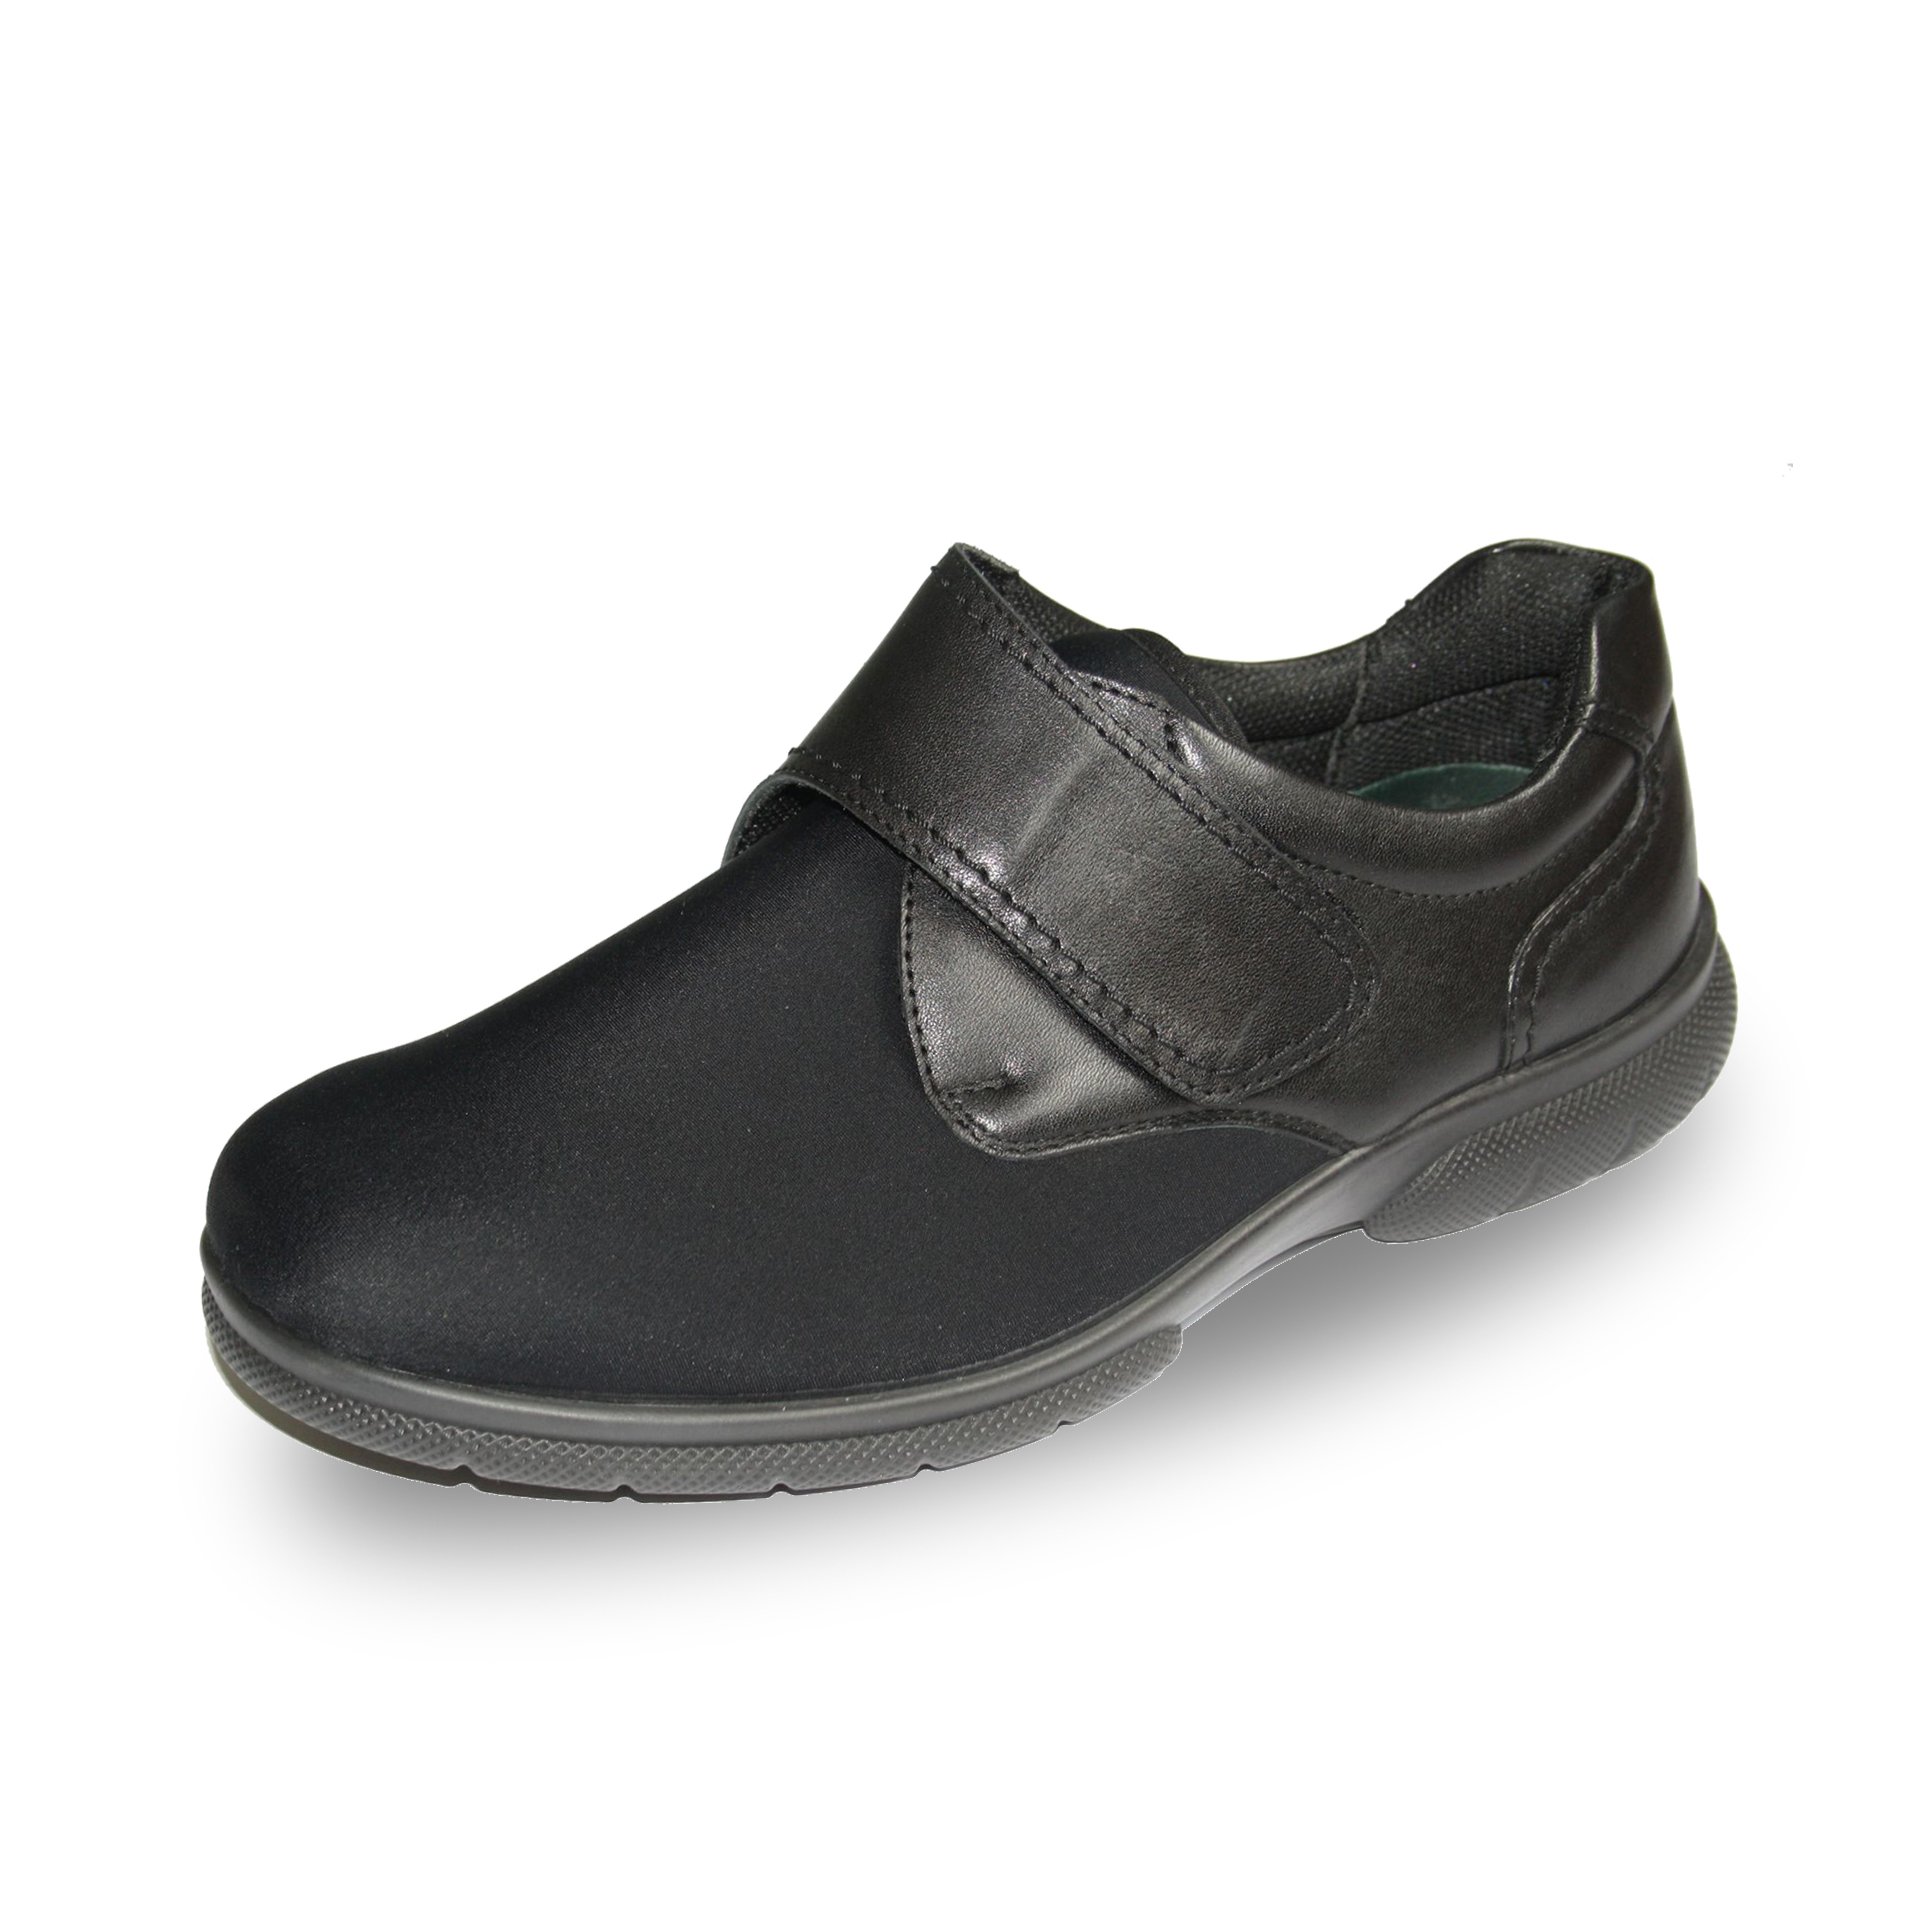 Diabetic Friendly Shoes by DB Wider Fit